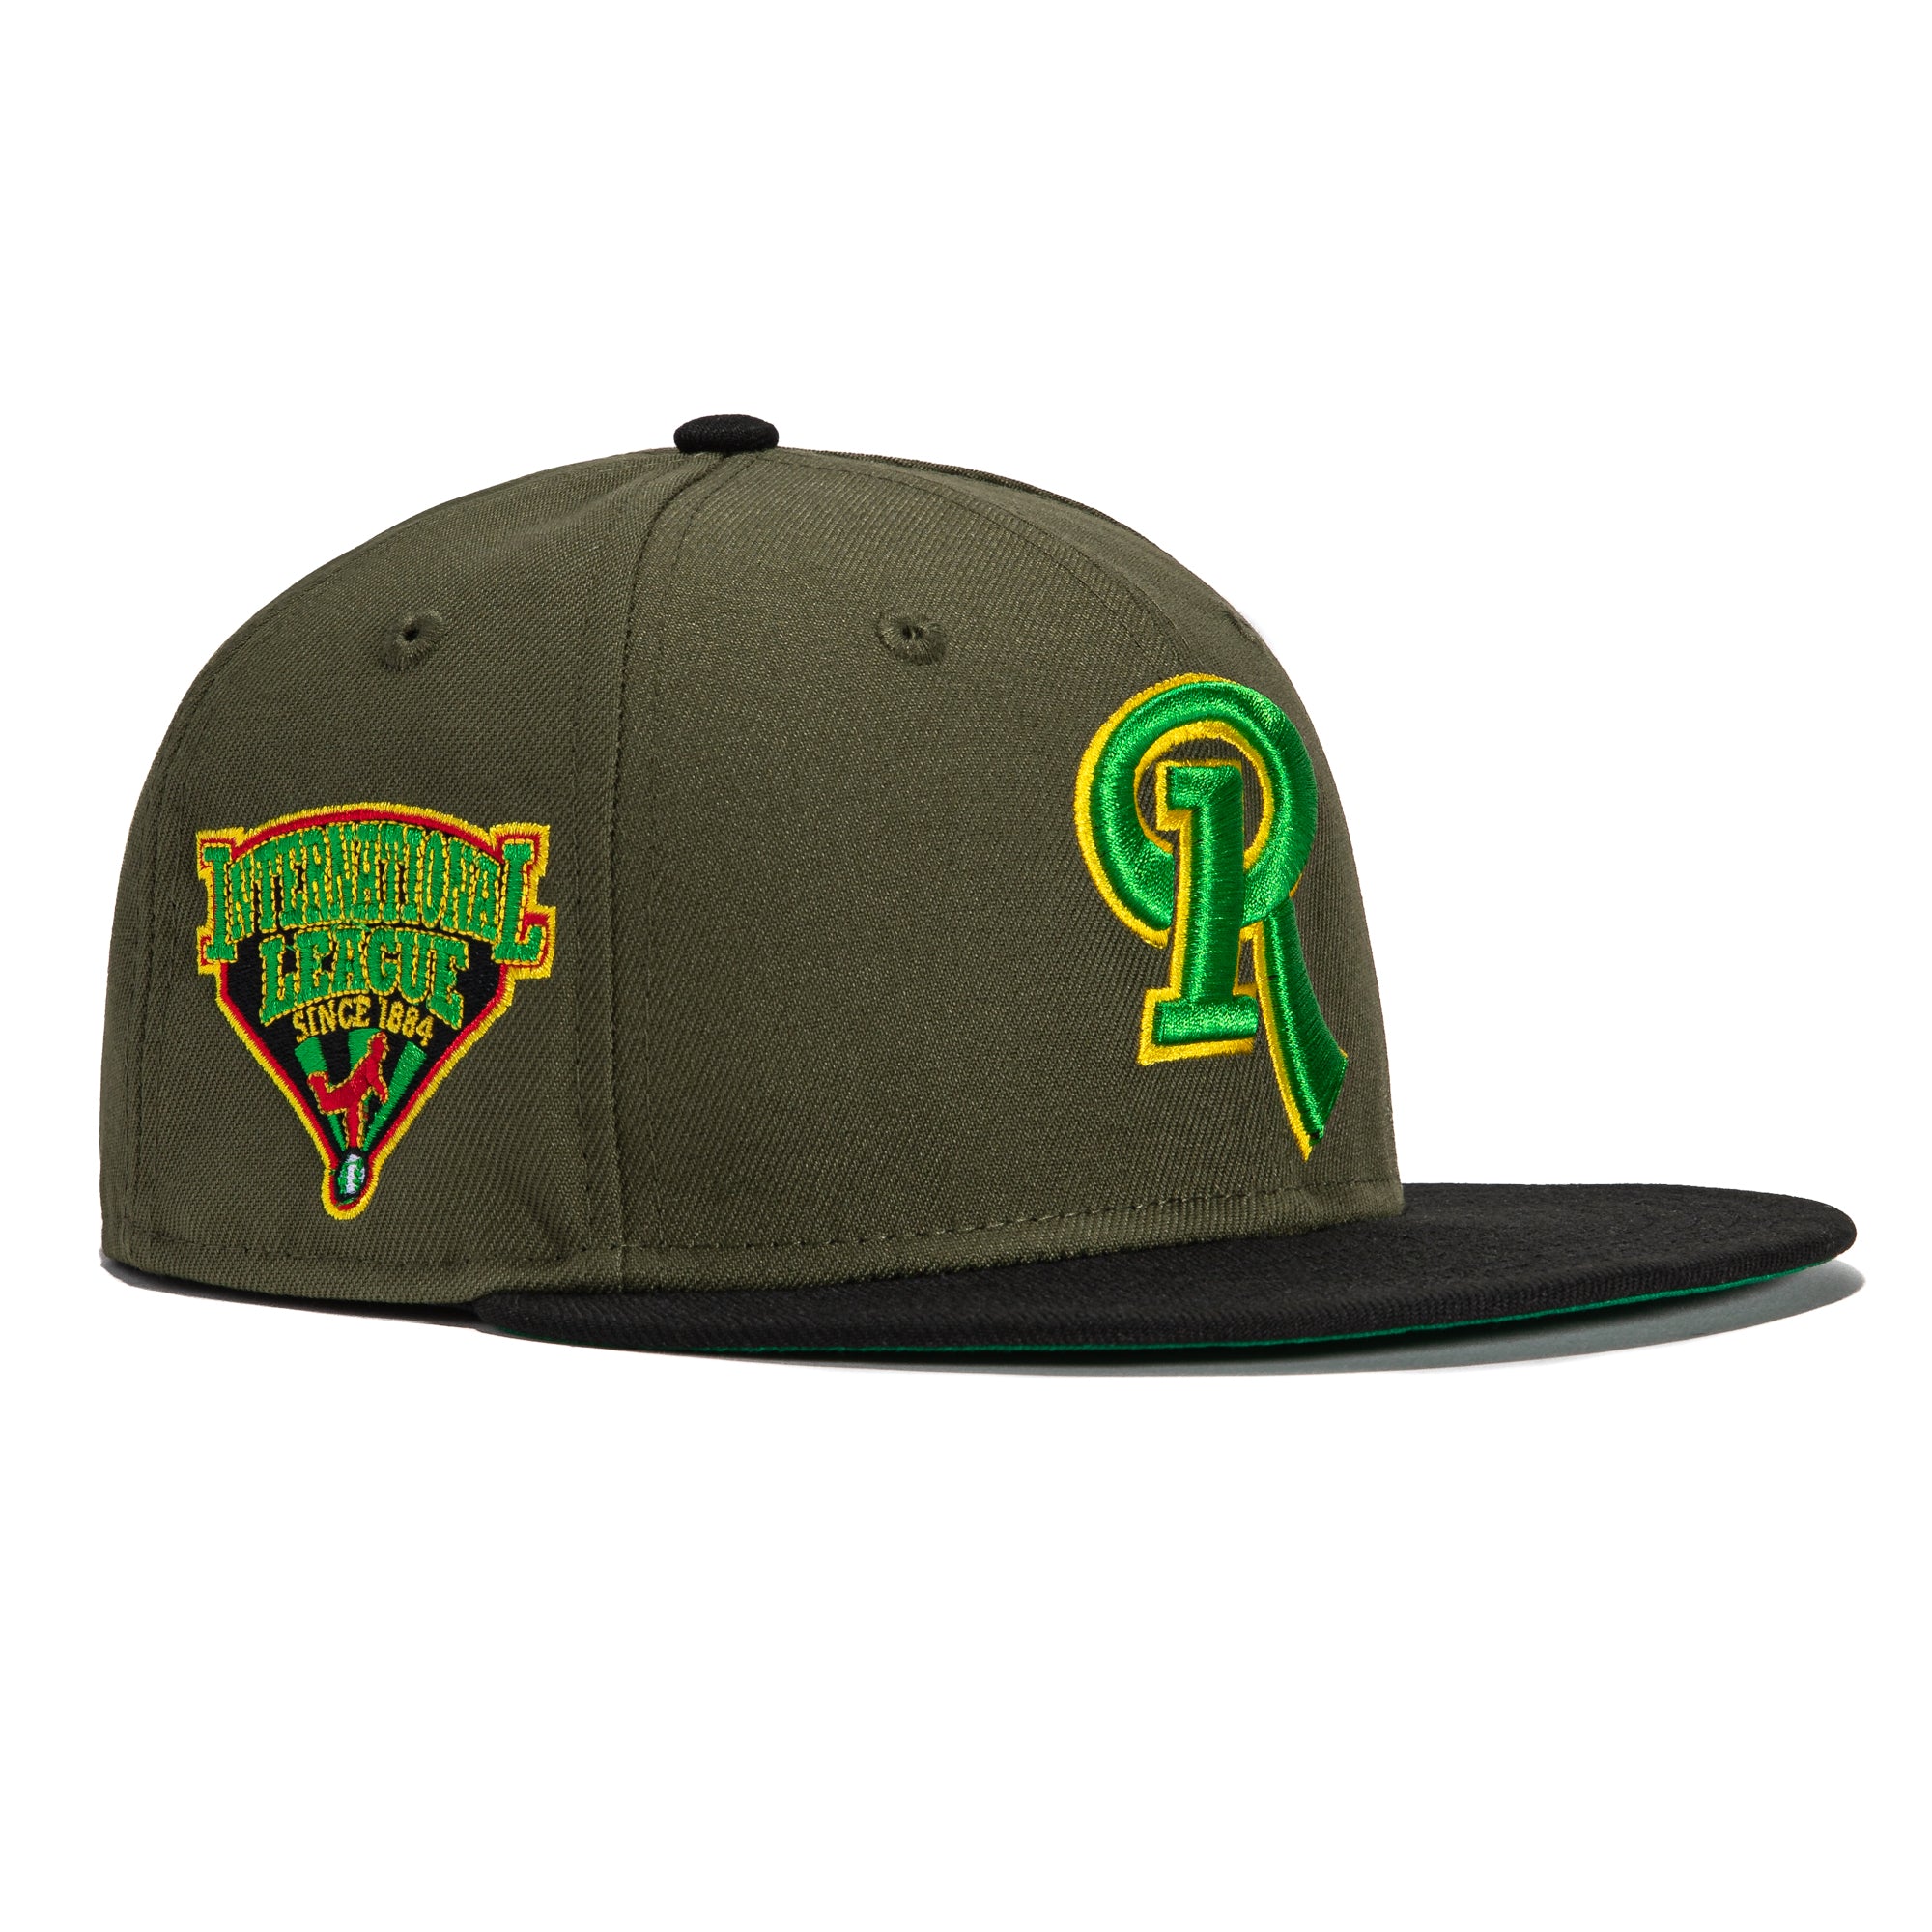 New Era 59FIFTY X-Pack Rochester Red Wings International League Patch Hat - Olive, Kelly Green, Gold Olive/Kelly/Gold / 7 1/8